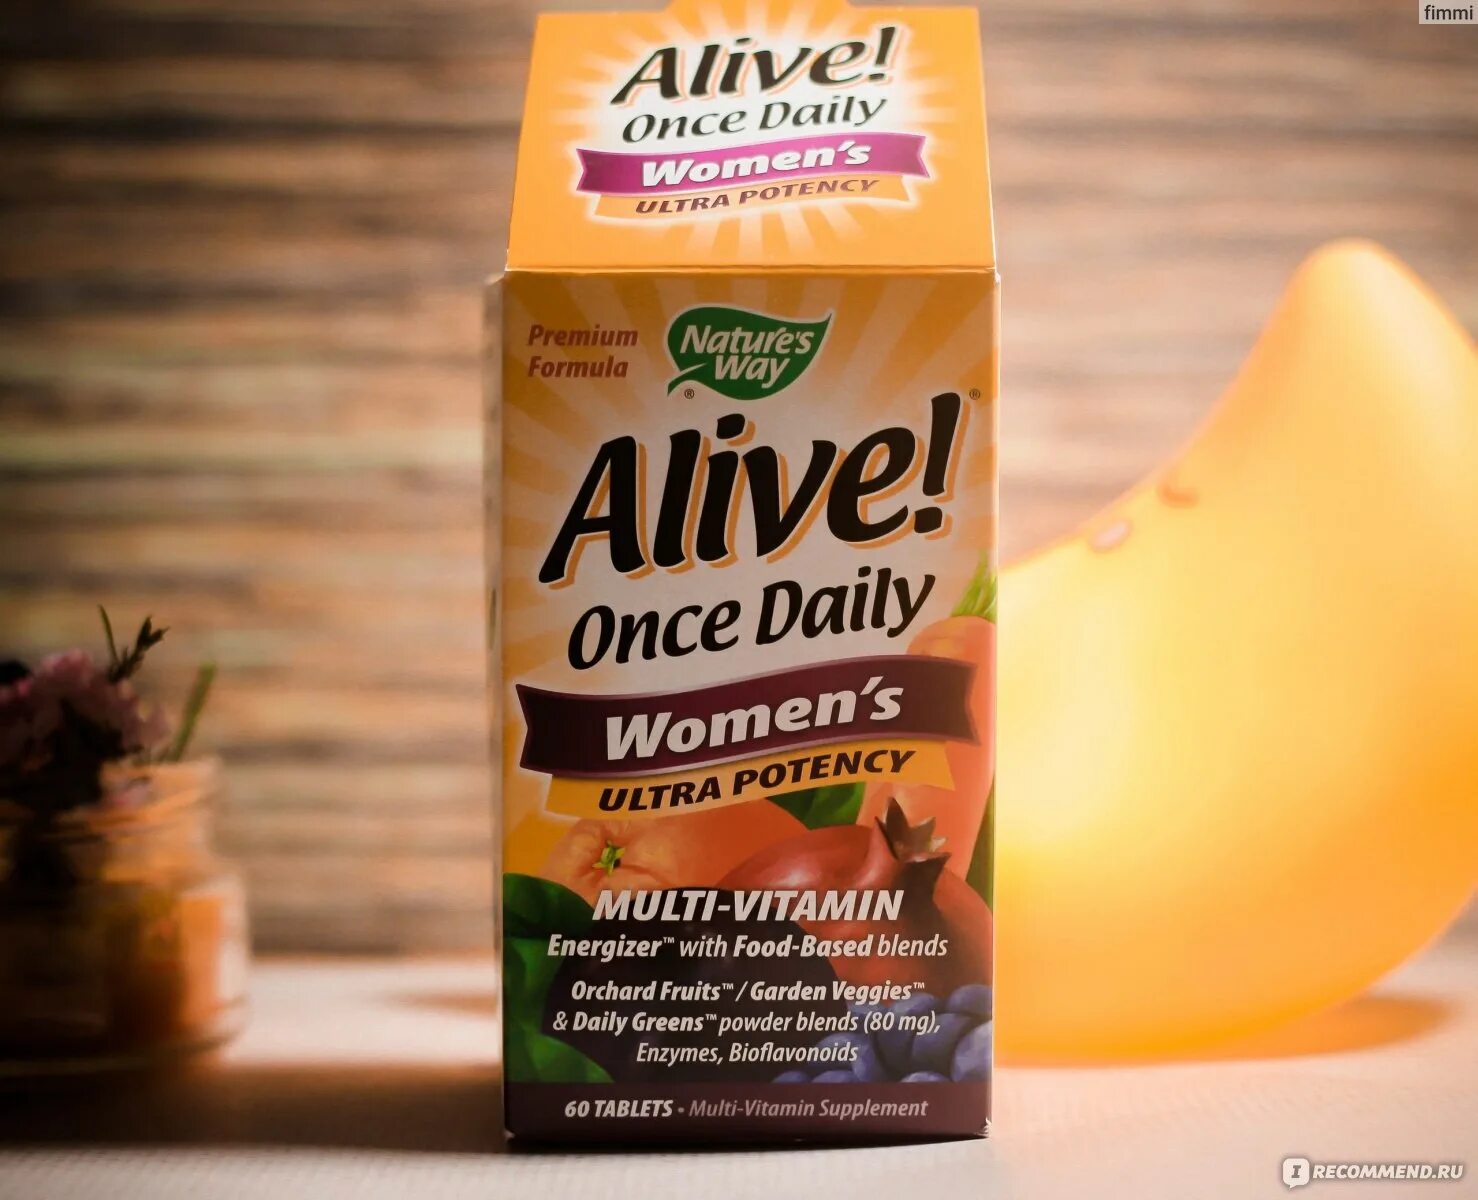 Once daily. Nature's way Alive once Daily women's Ultra Potency. Витамины Alive women's Ultra Potency. Витаминно-минеральный комплекс nature's way Alive! Once Daily women's Ultra Potency. Nature's way, Alive! Once Daily.